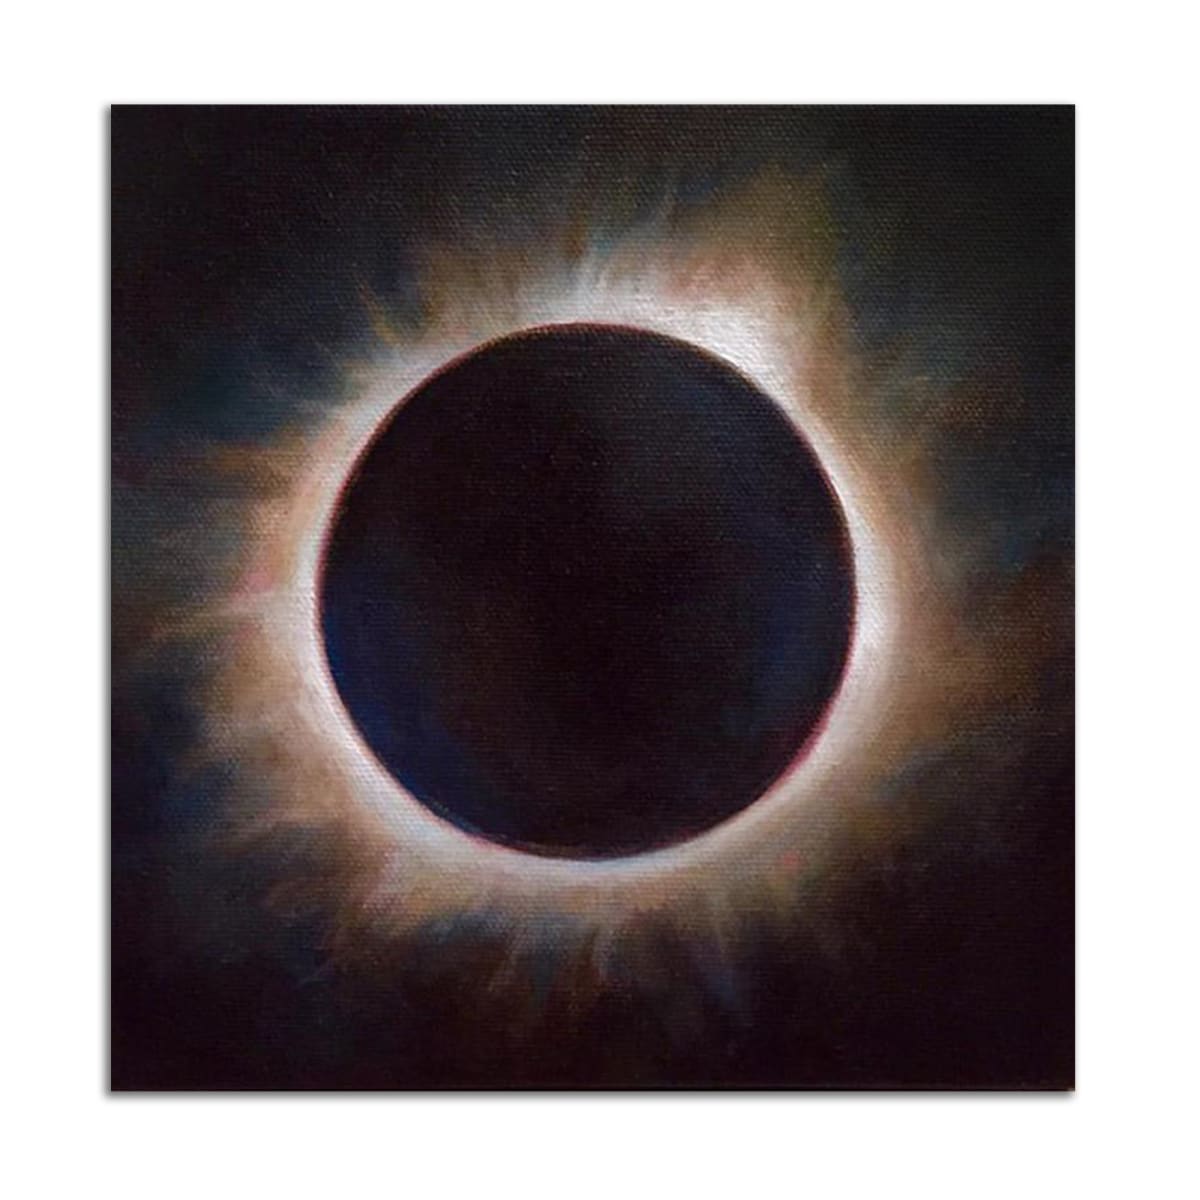 32: Solar Eclipse by Christie Snelson 